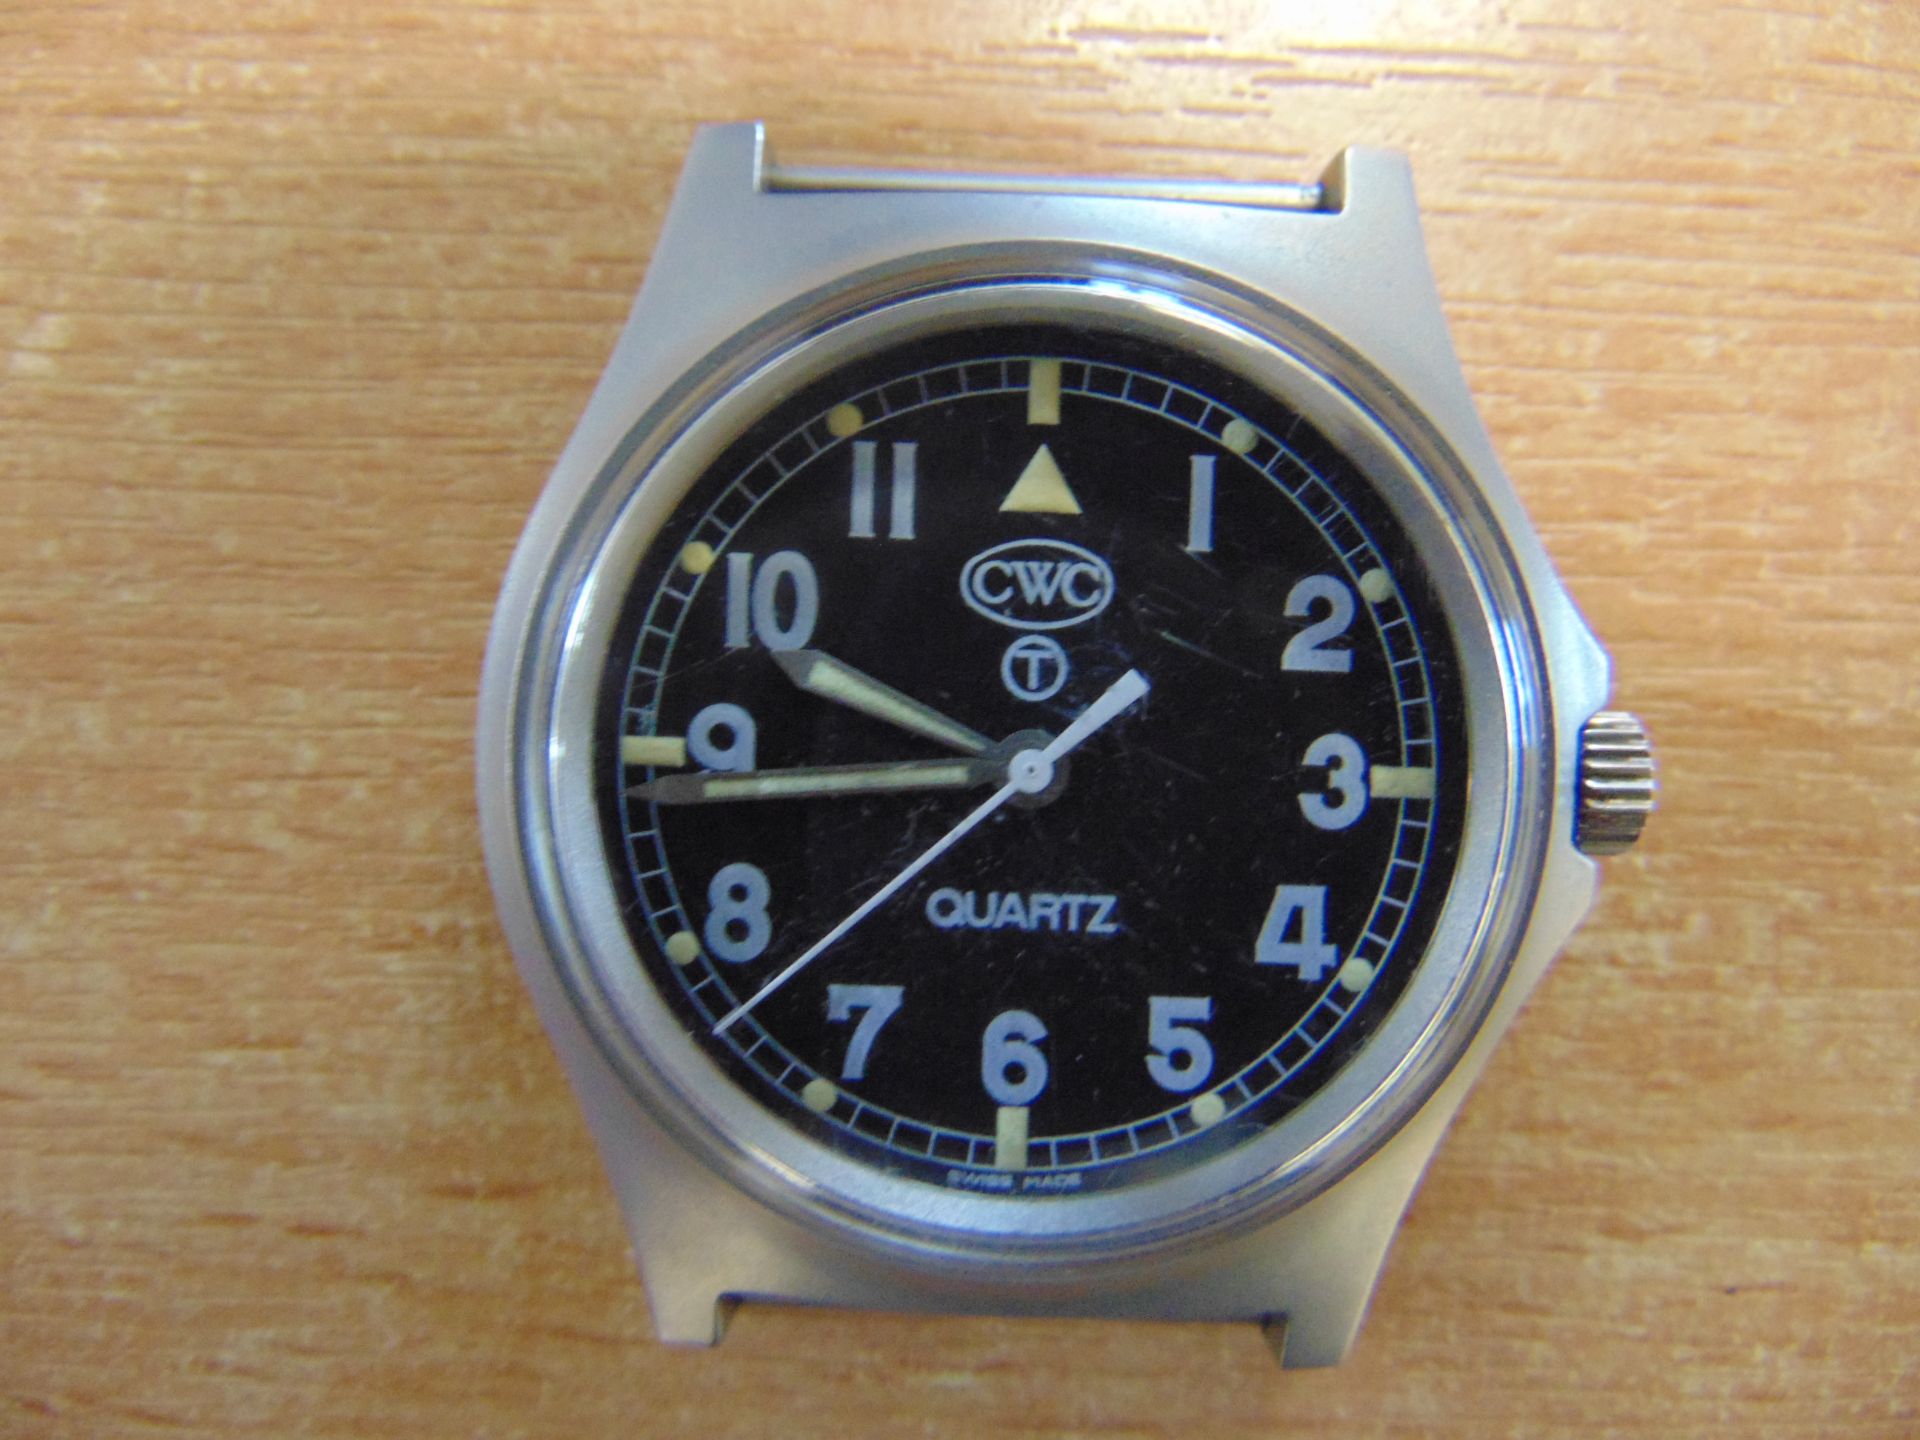 Rare 0555 CWC (cabot Watch Co Switzerland) Royal Marines Issue Service Watch - Image 3 of 5